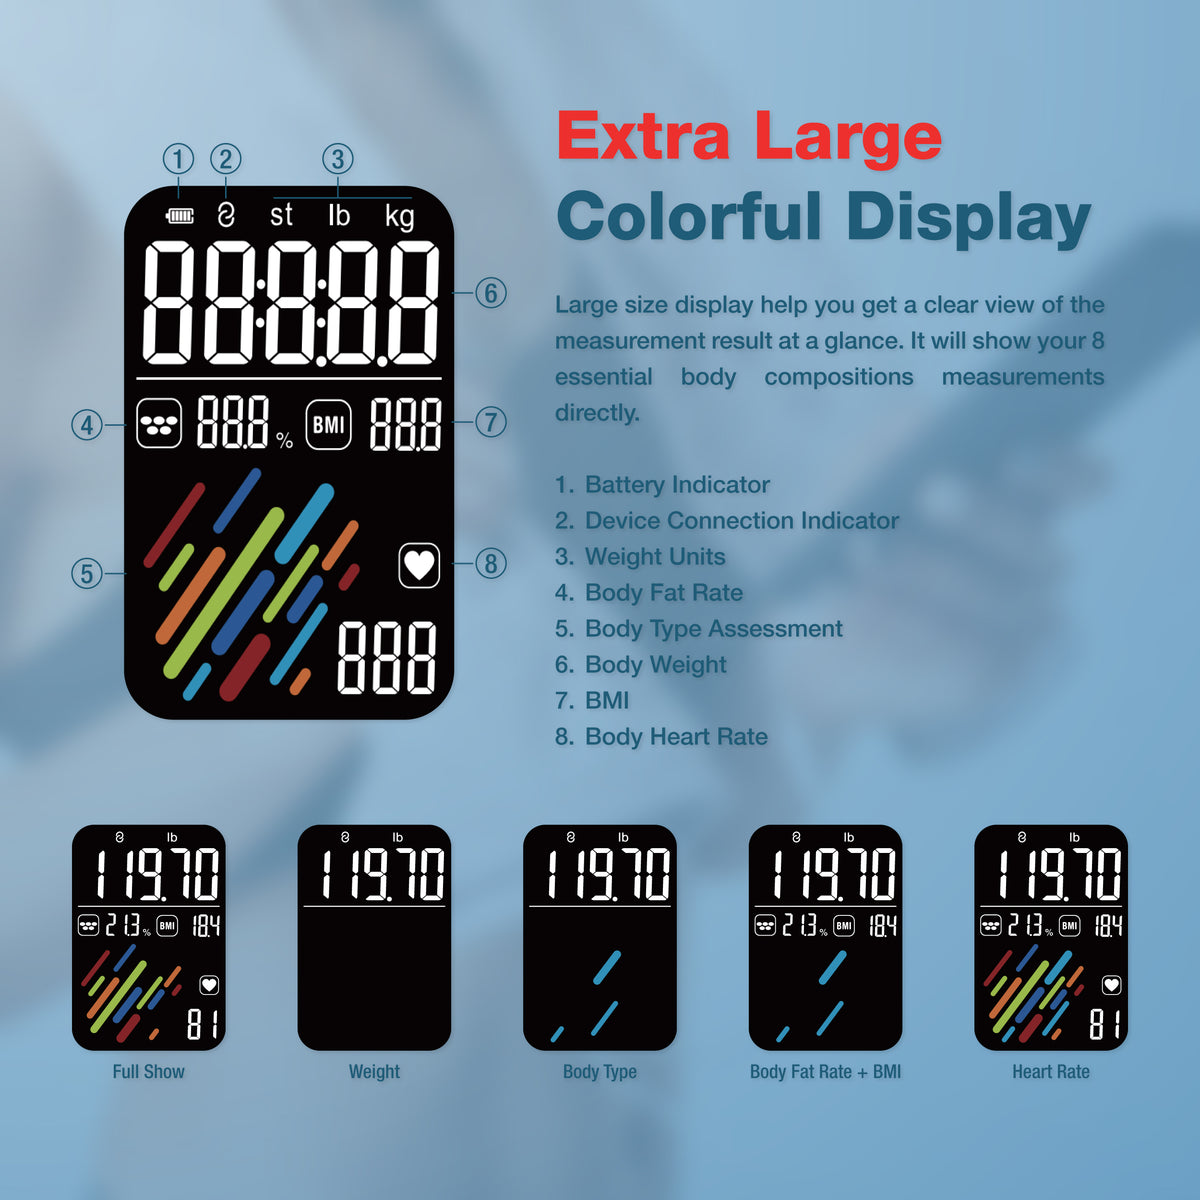 Smart Digital Scale - extra large colorful display